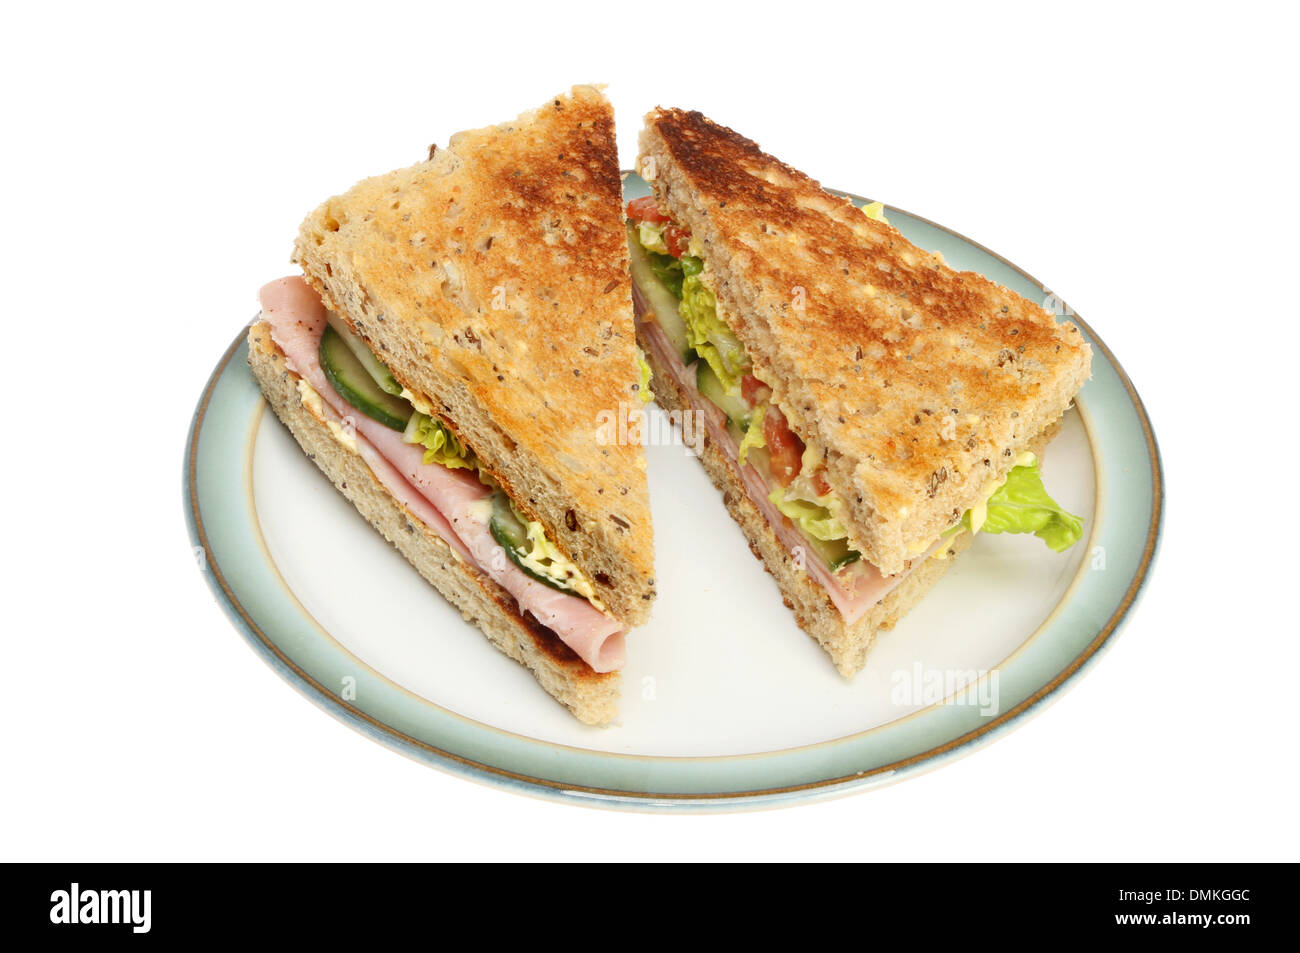 Ham salad sandwich on toasted seeded bread on a plate isolated against white Stock Photo